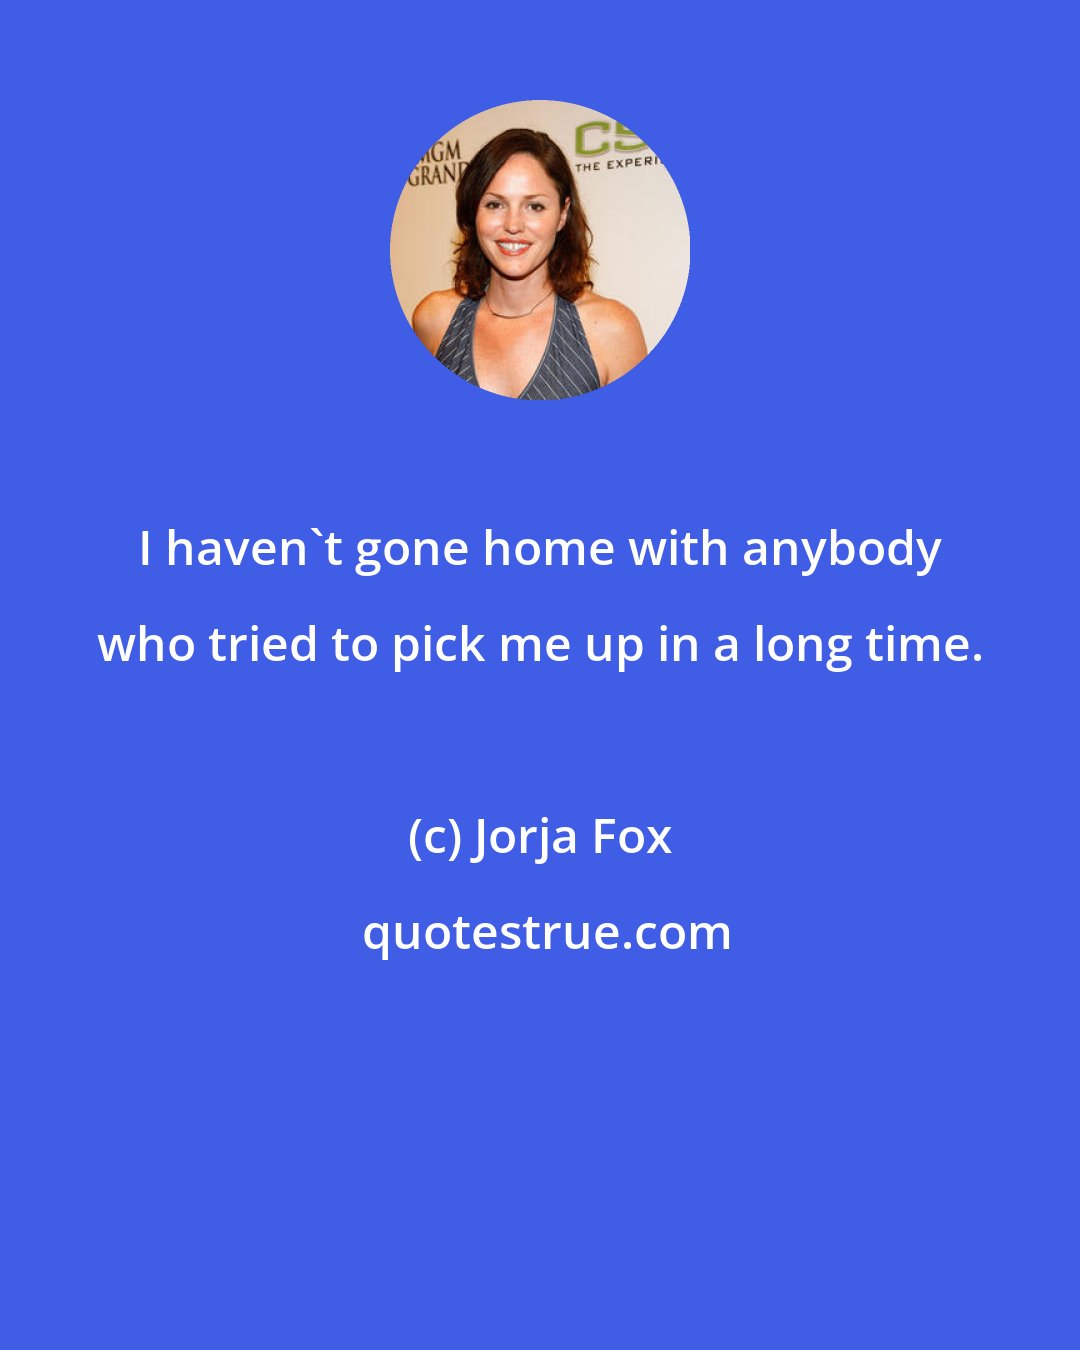 Jorja Fox: I haven't gone home with anybody who tried to pick me up in a long time.